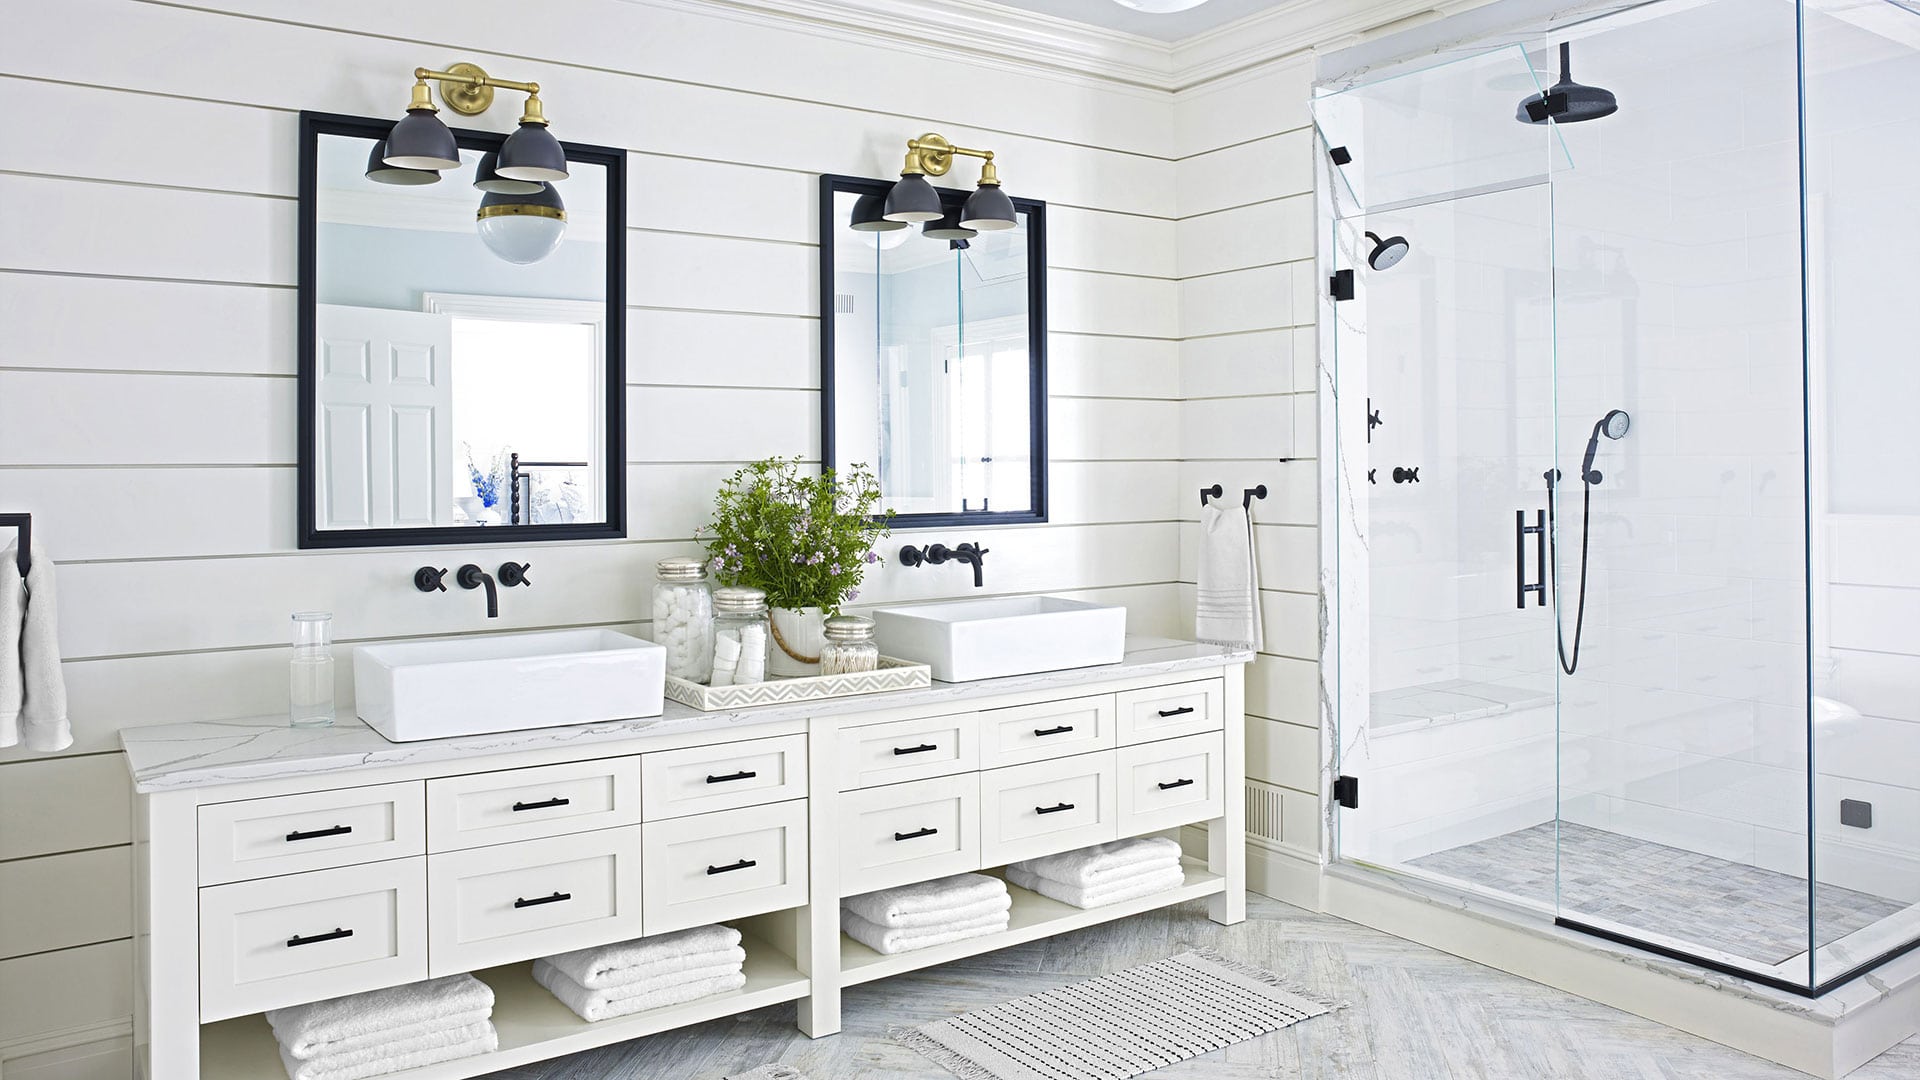 Turn your dream bathroom into reality